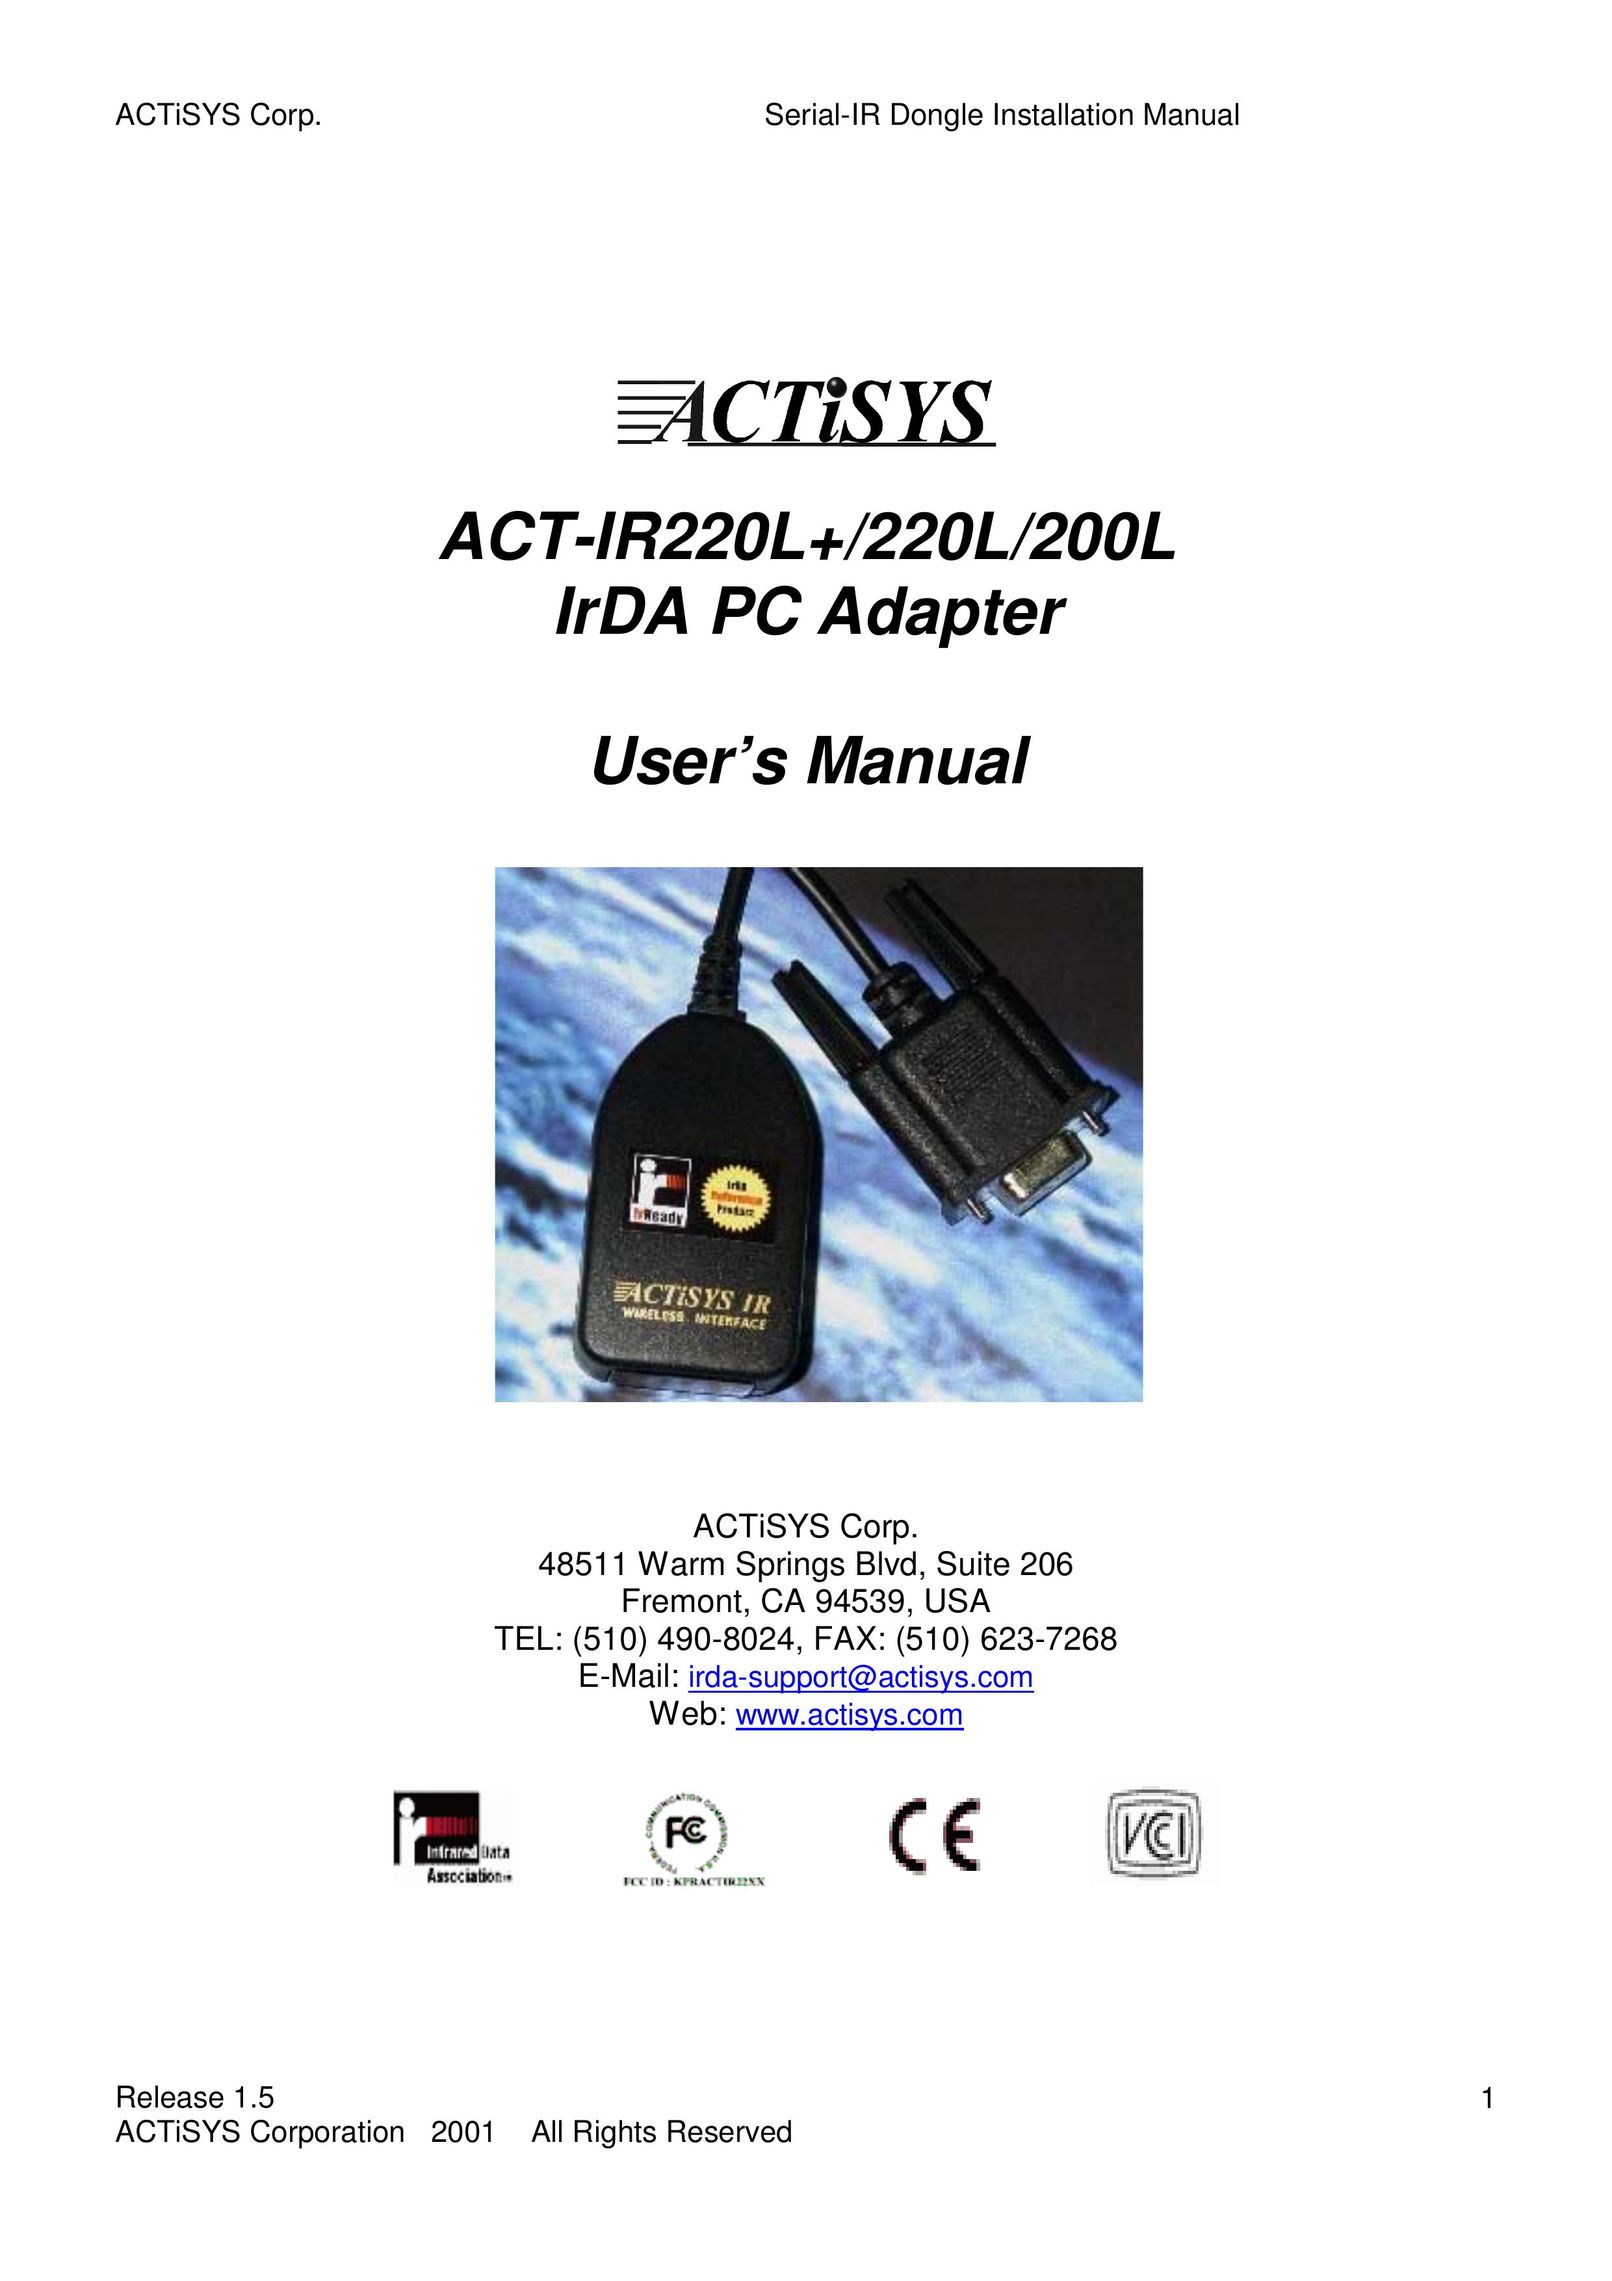 ACTiSYS ACT-IR220L Computer Accessories User Manual